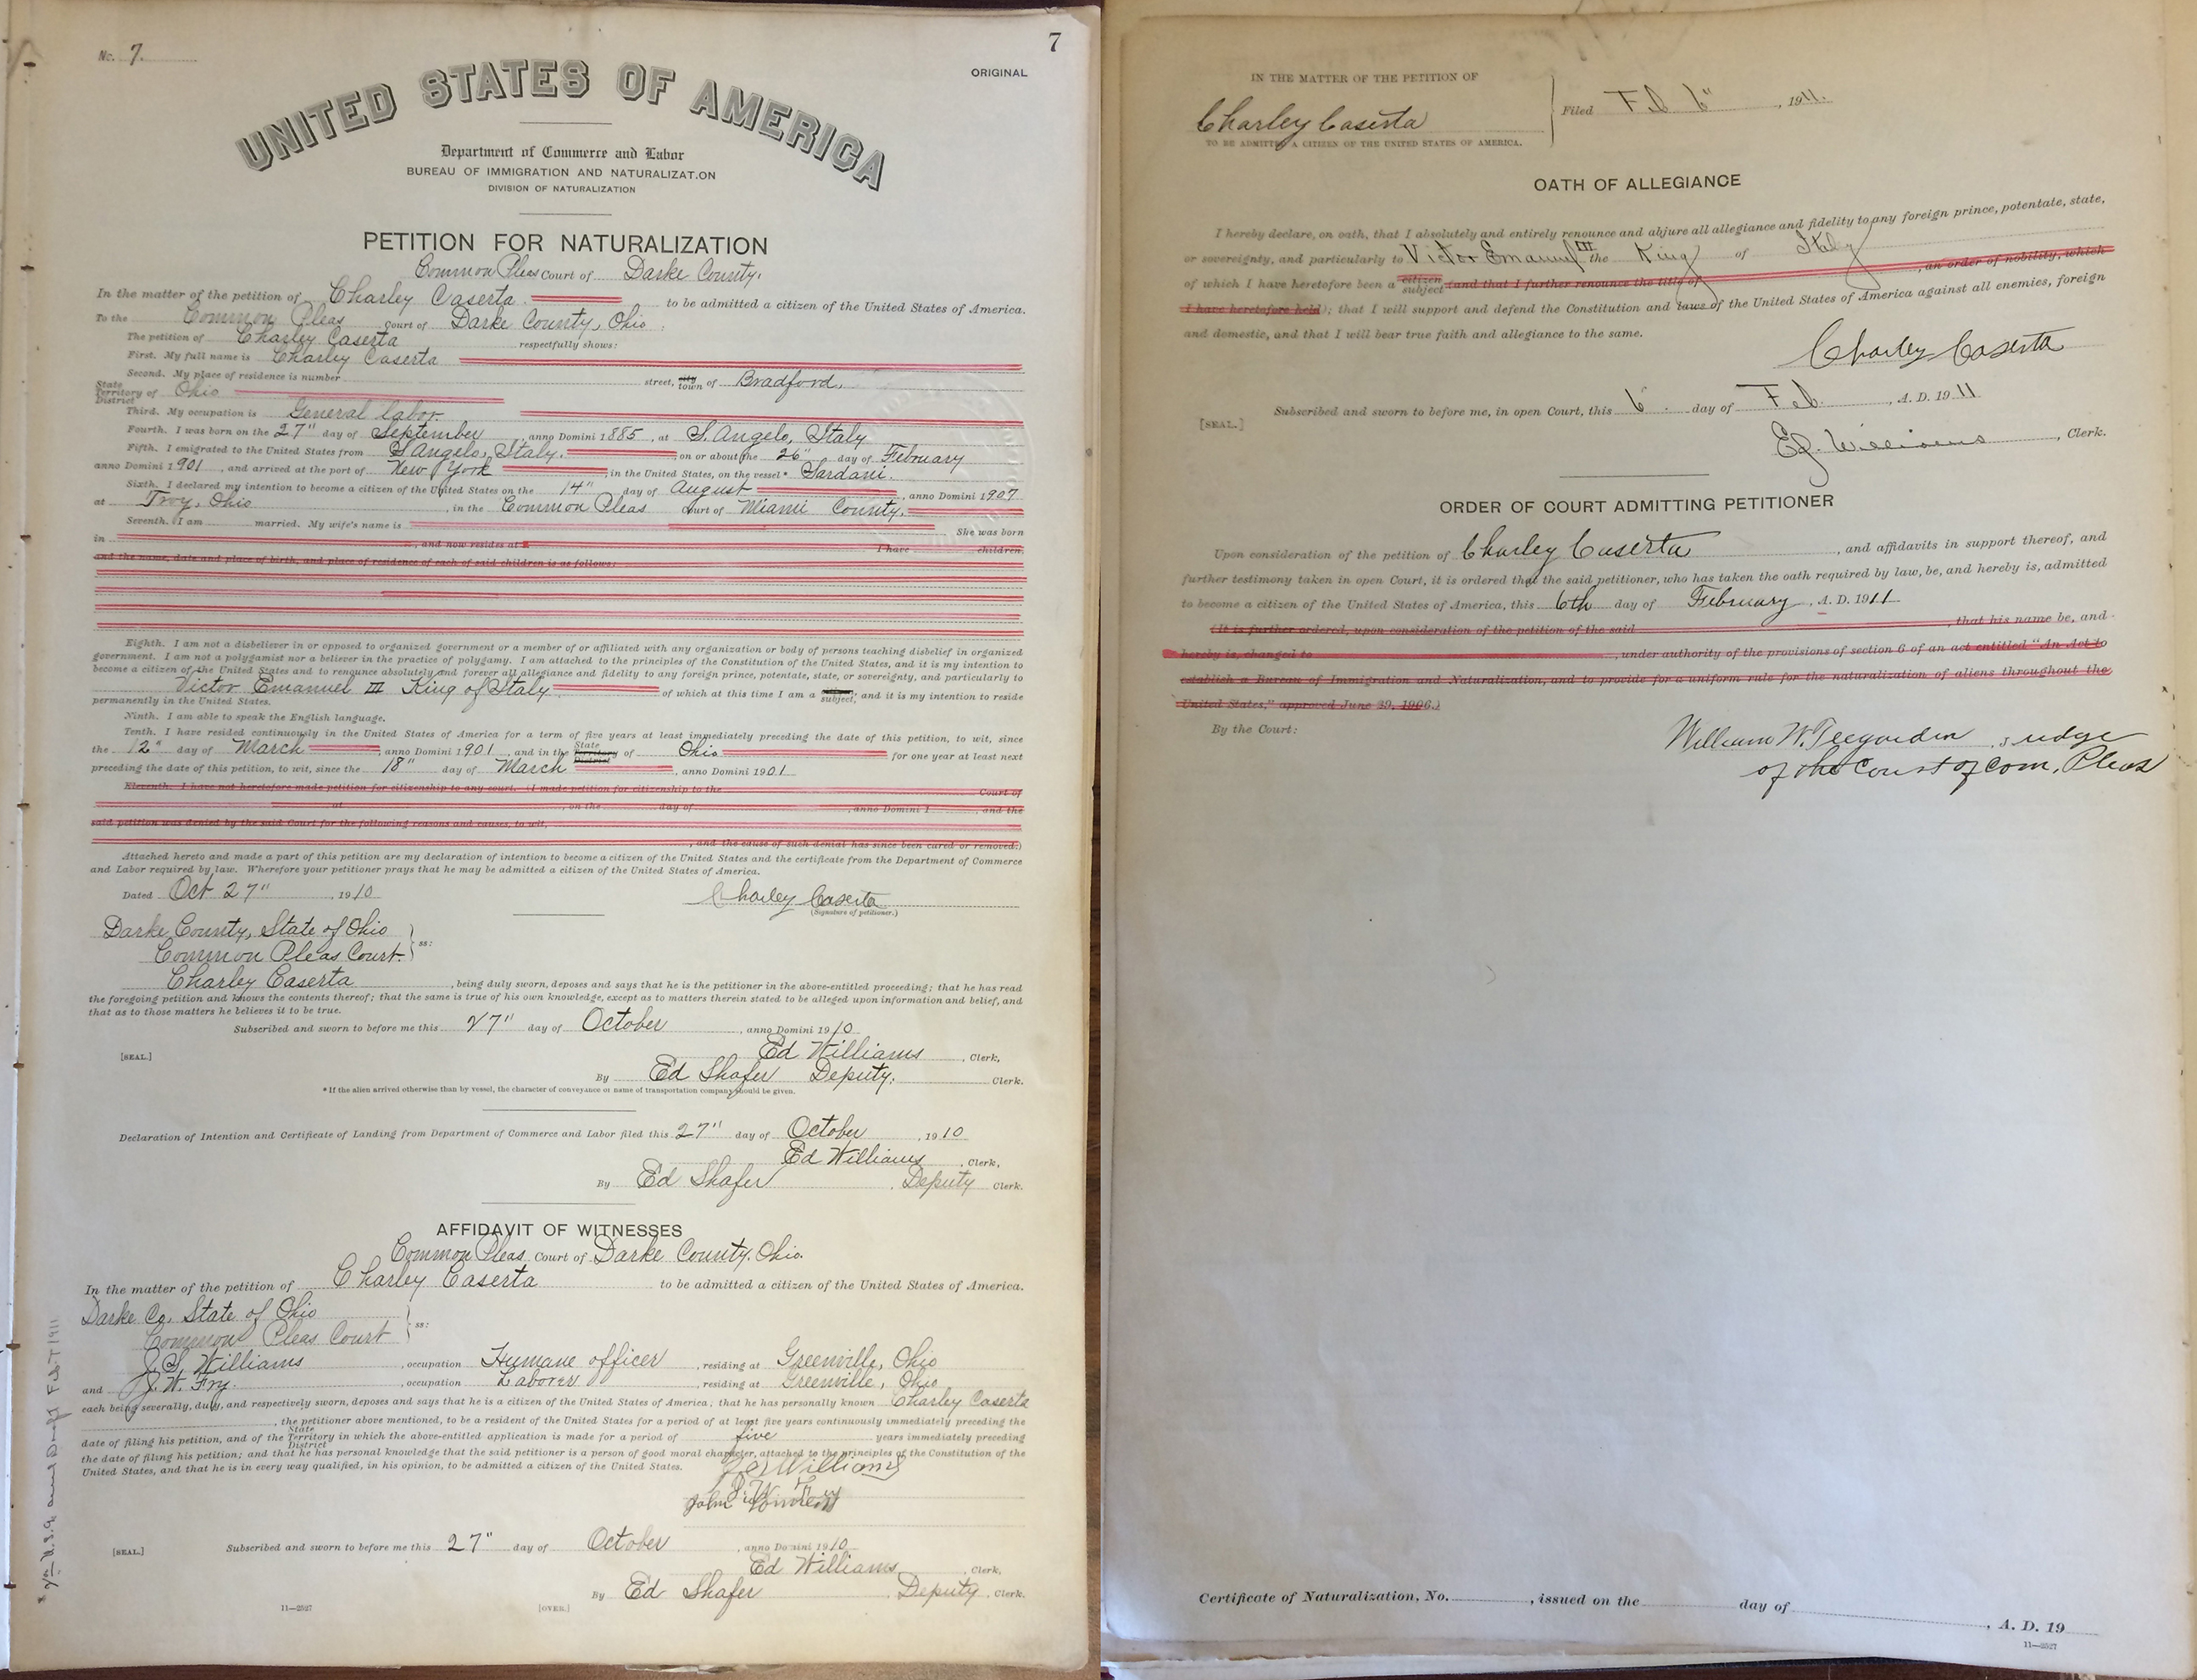 Petition for Naturalization of Charley Caserta, Darke County, 1910, front and back